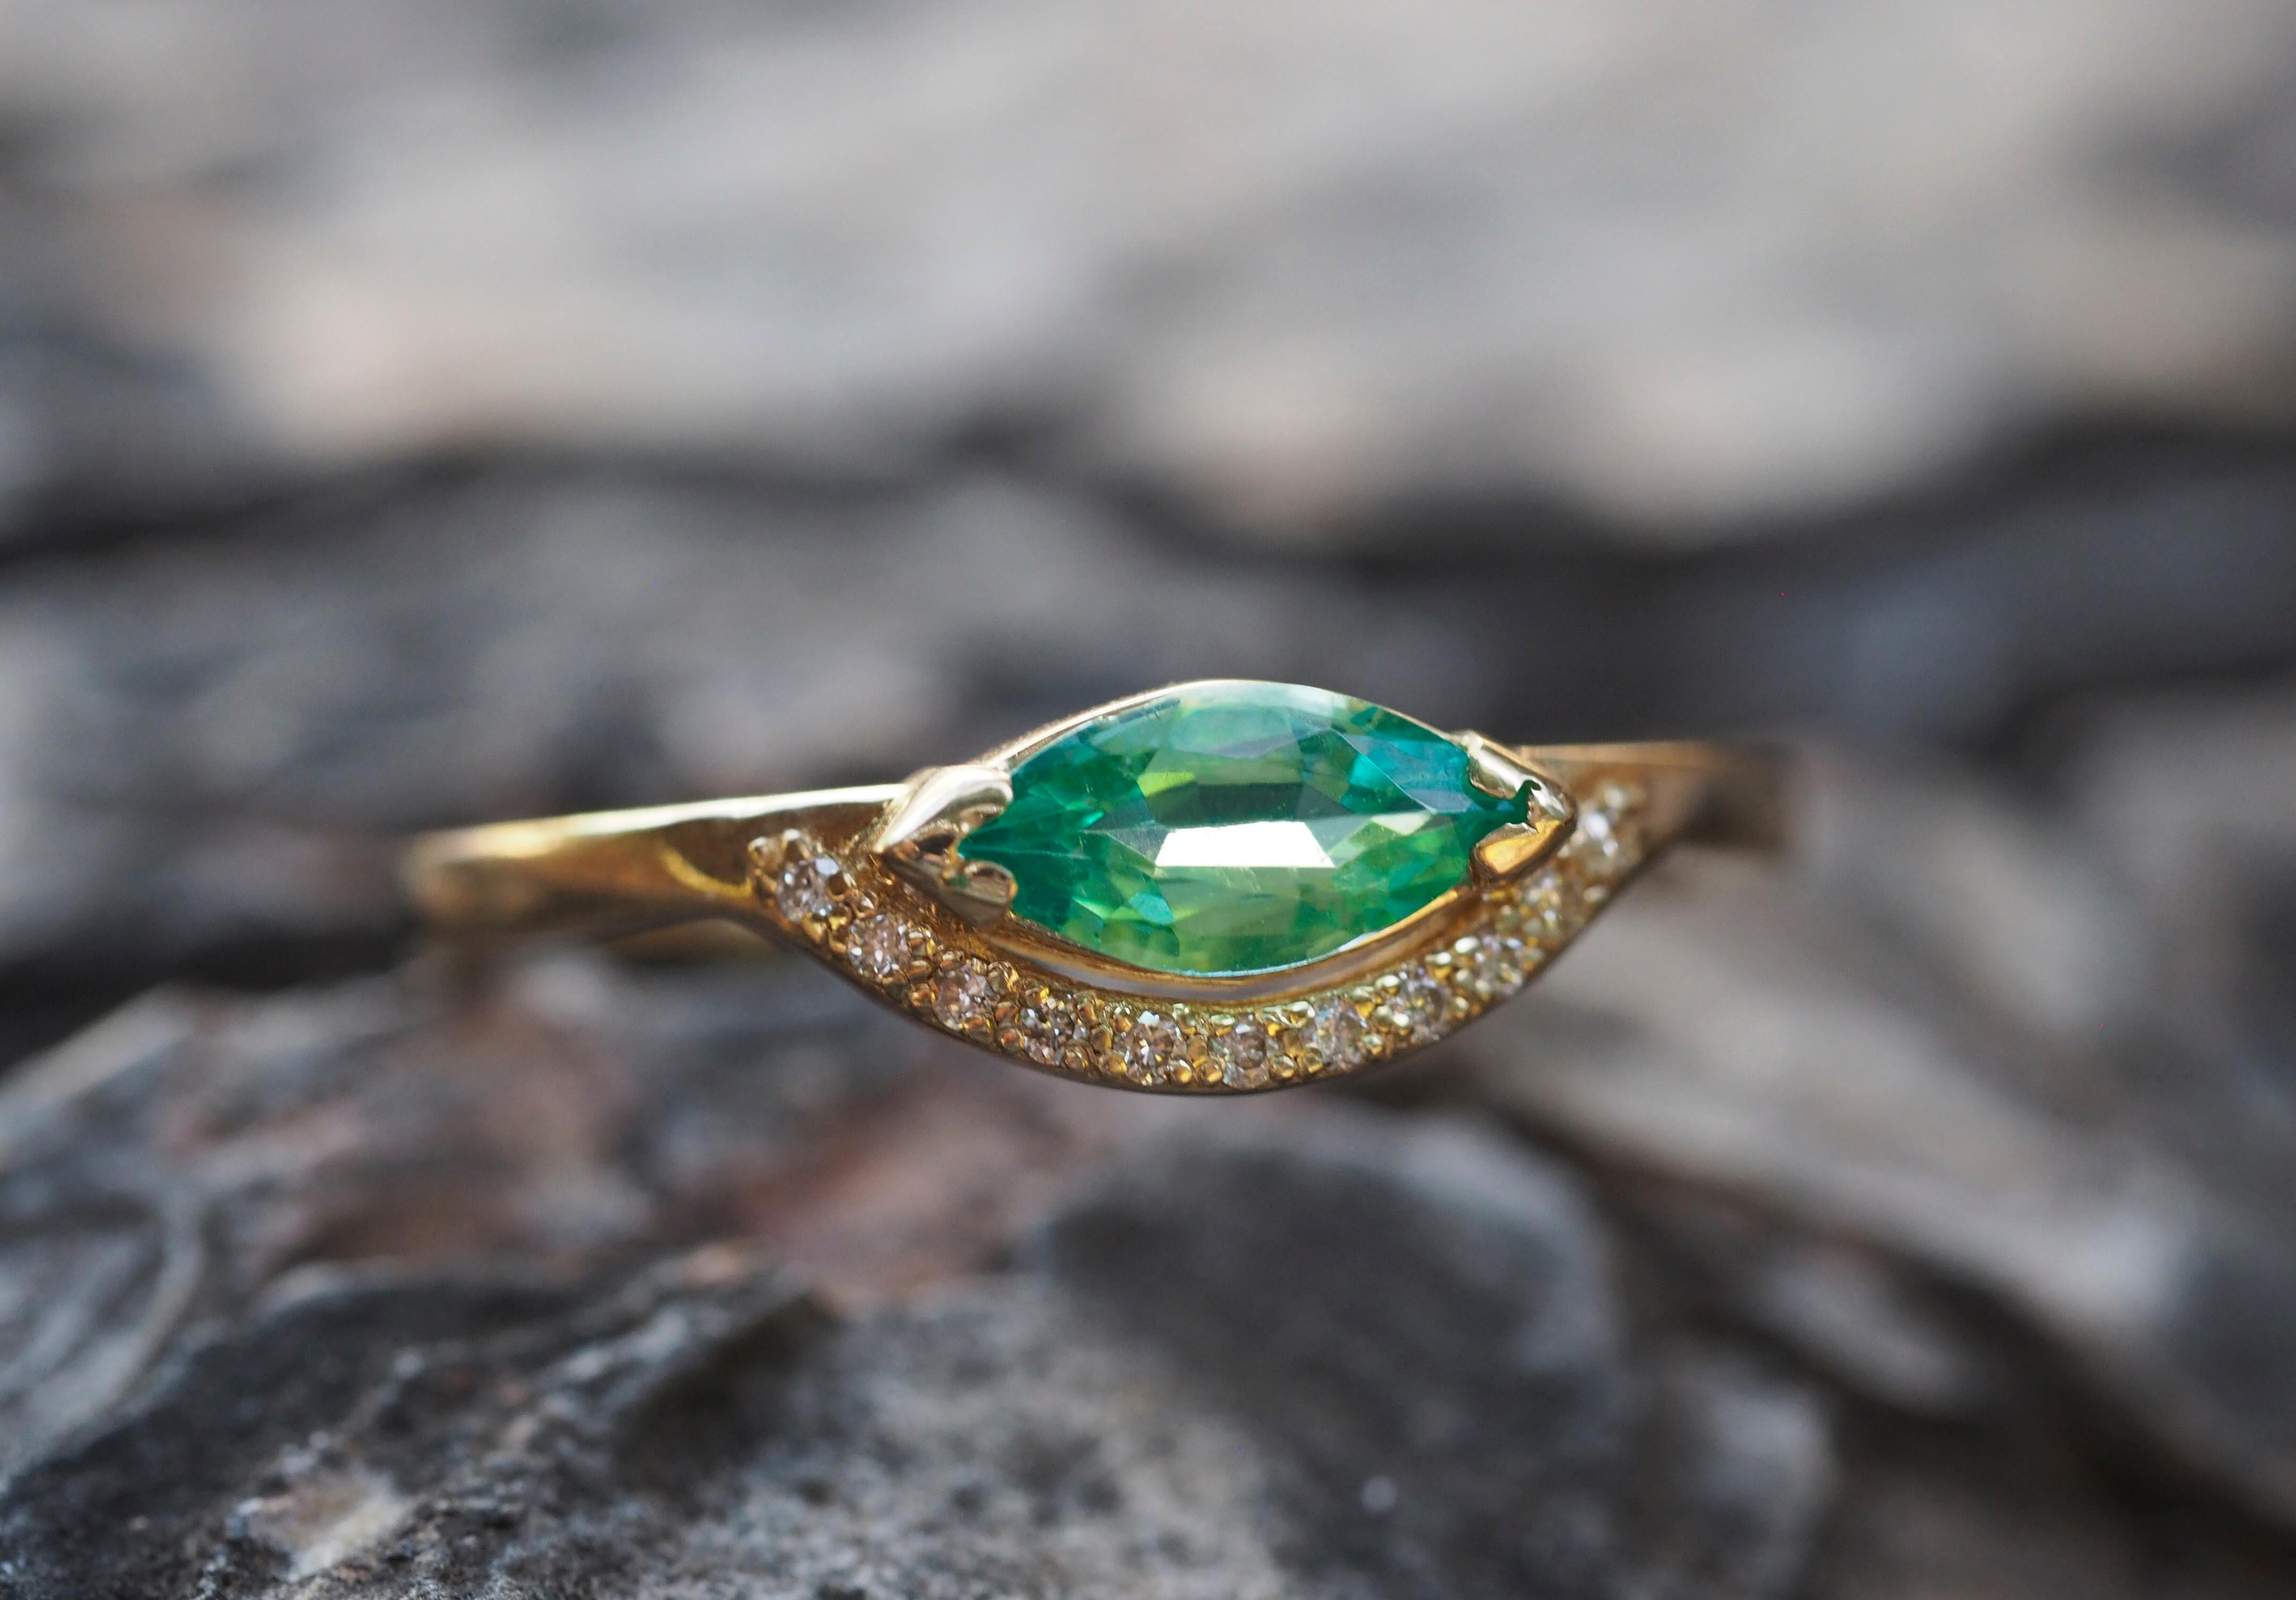 For Sale:  14 K Gold Ring with Marquise Cut Emerald and Diamonds 13